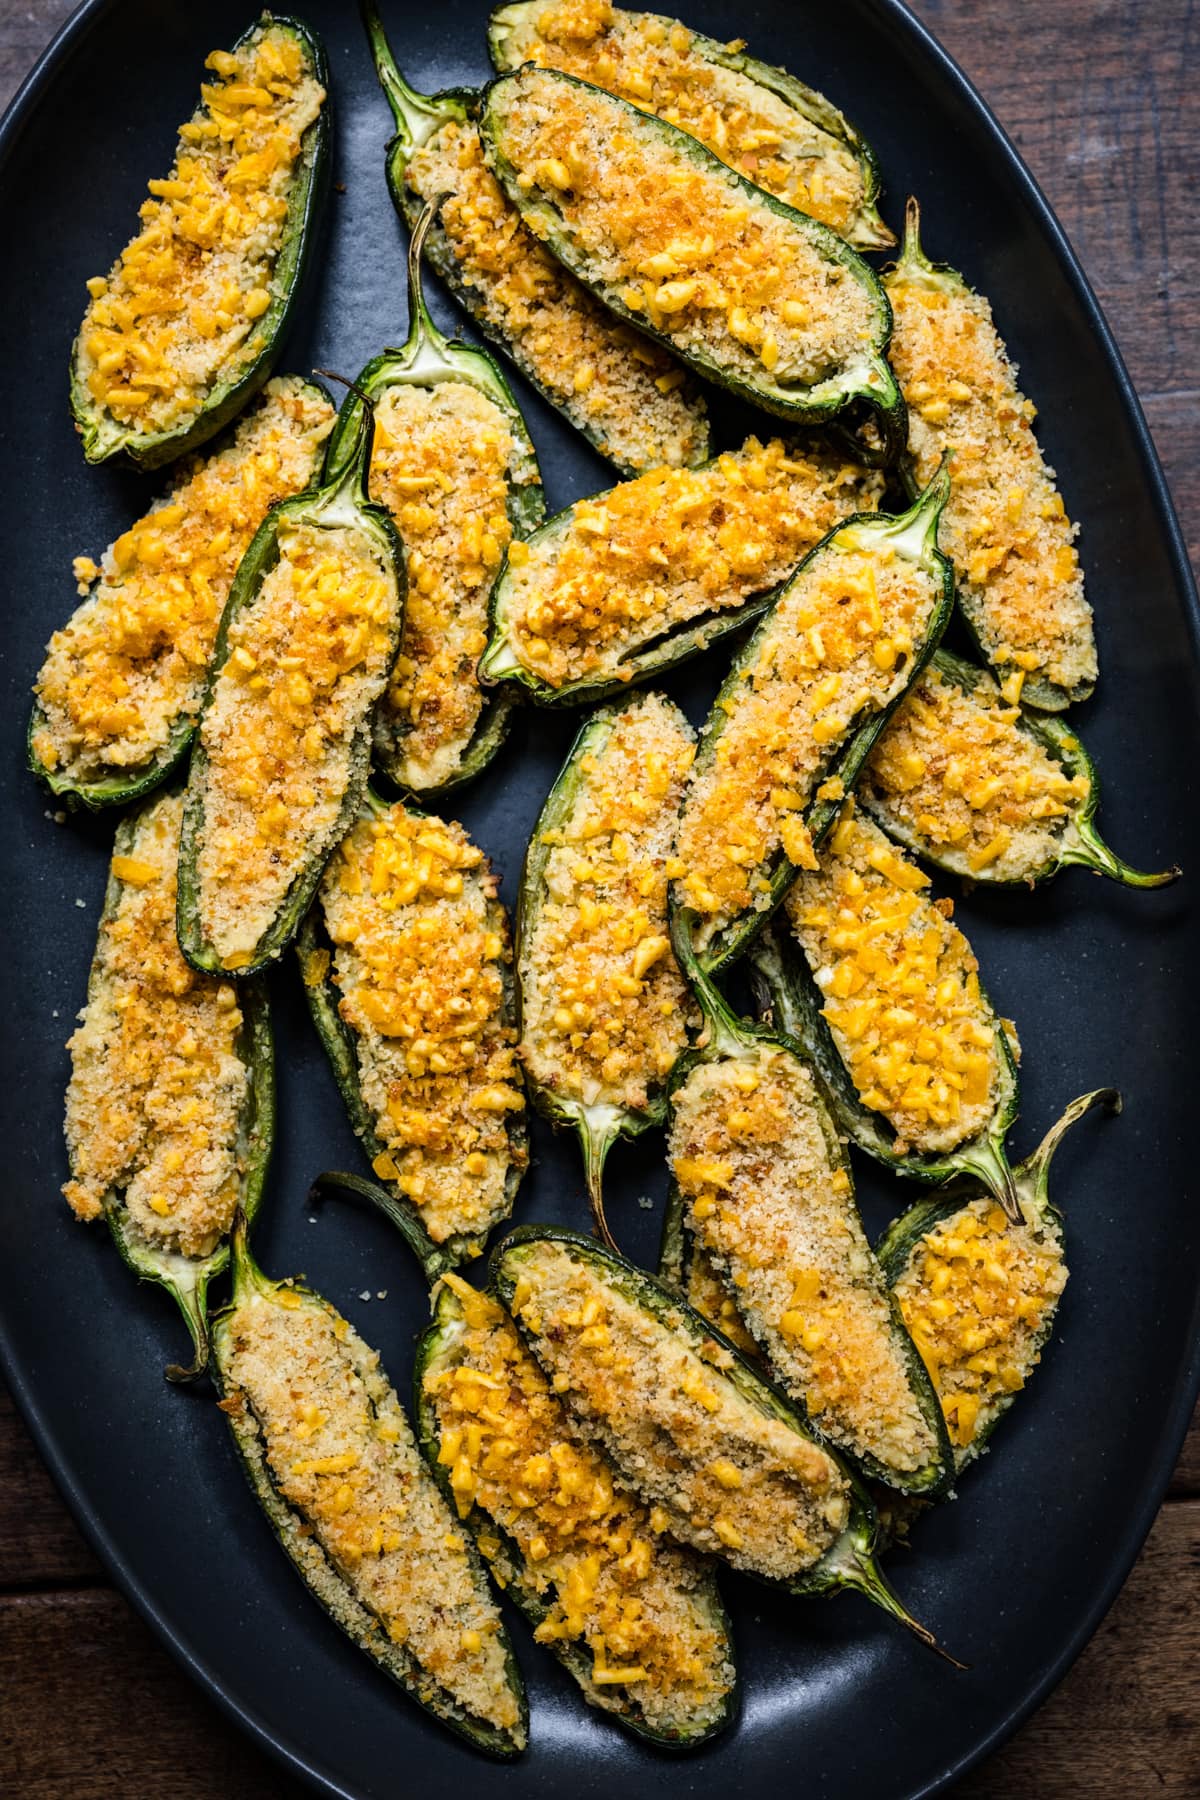 Overhead view of jalapeno poppers on a dish.